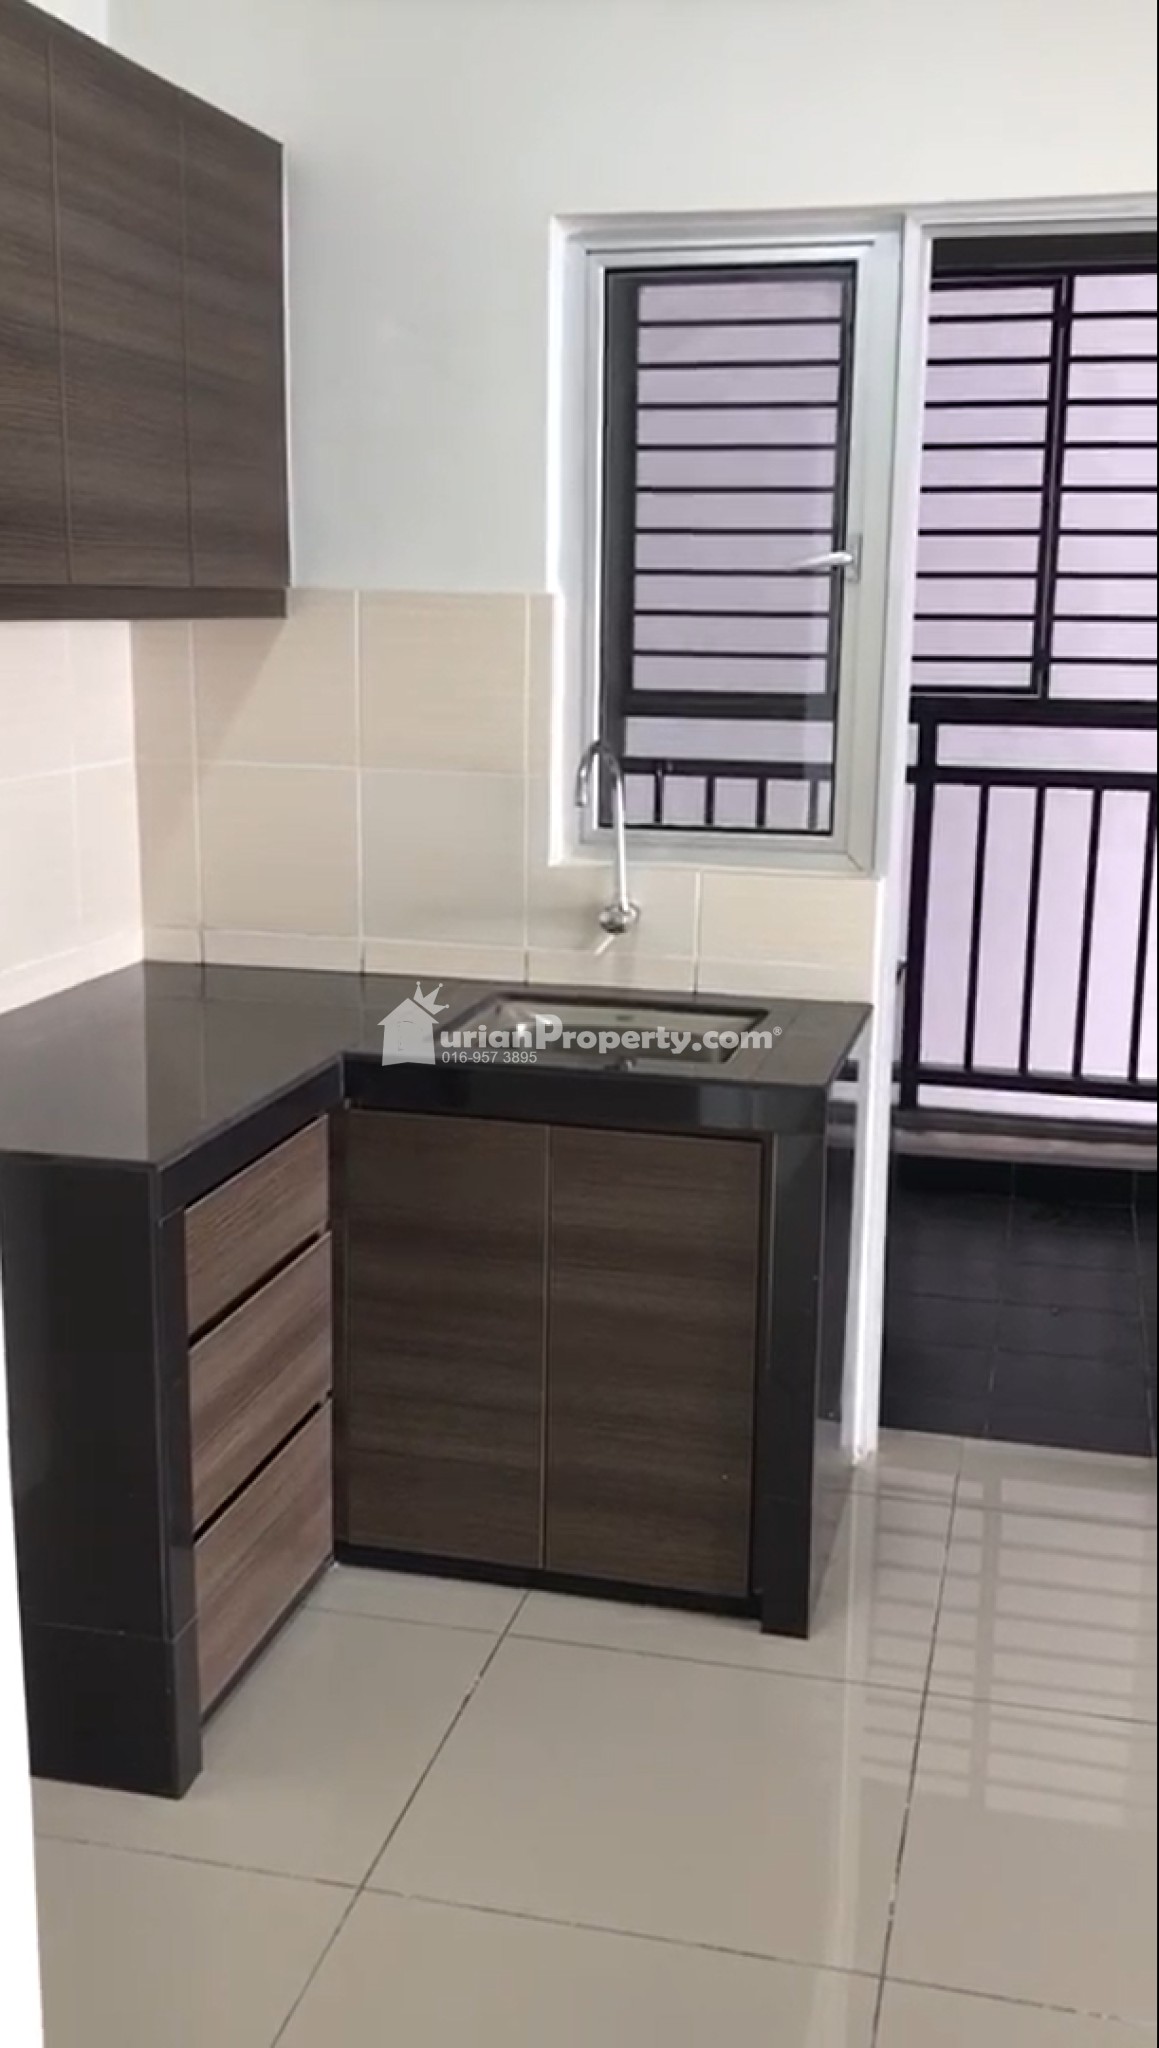 Condo For Rent at Maxim Residences